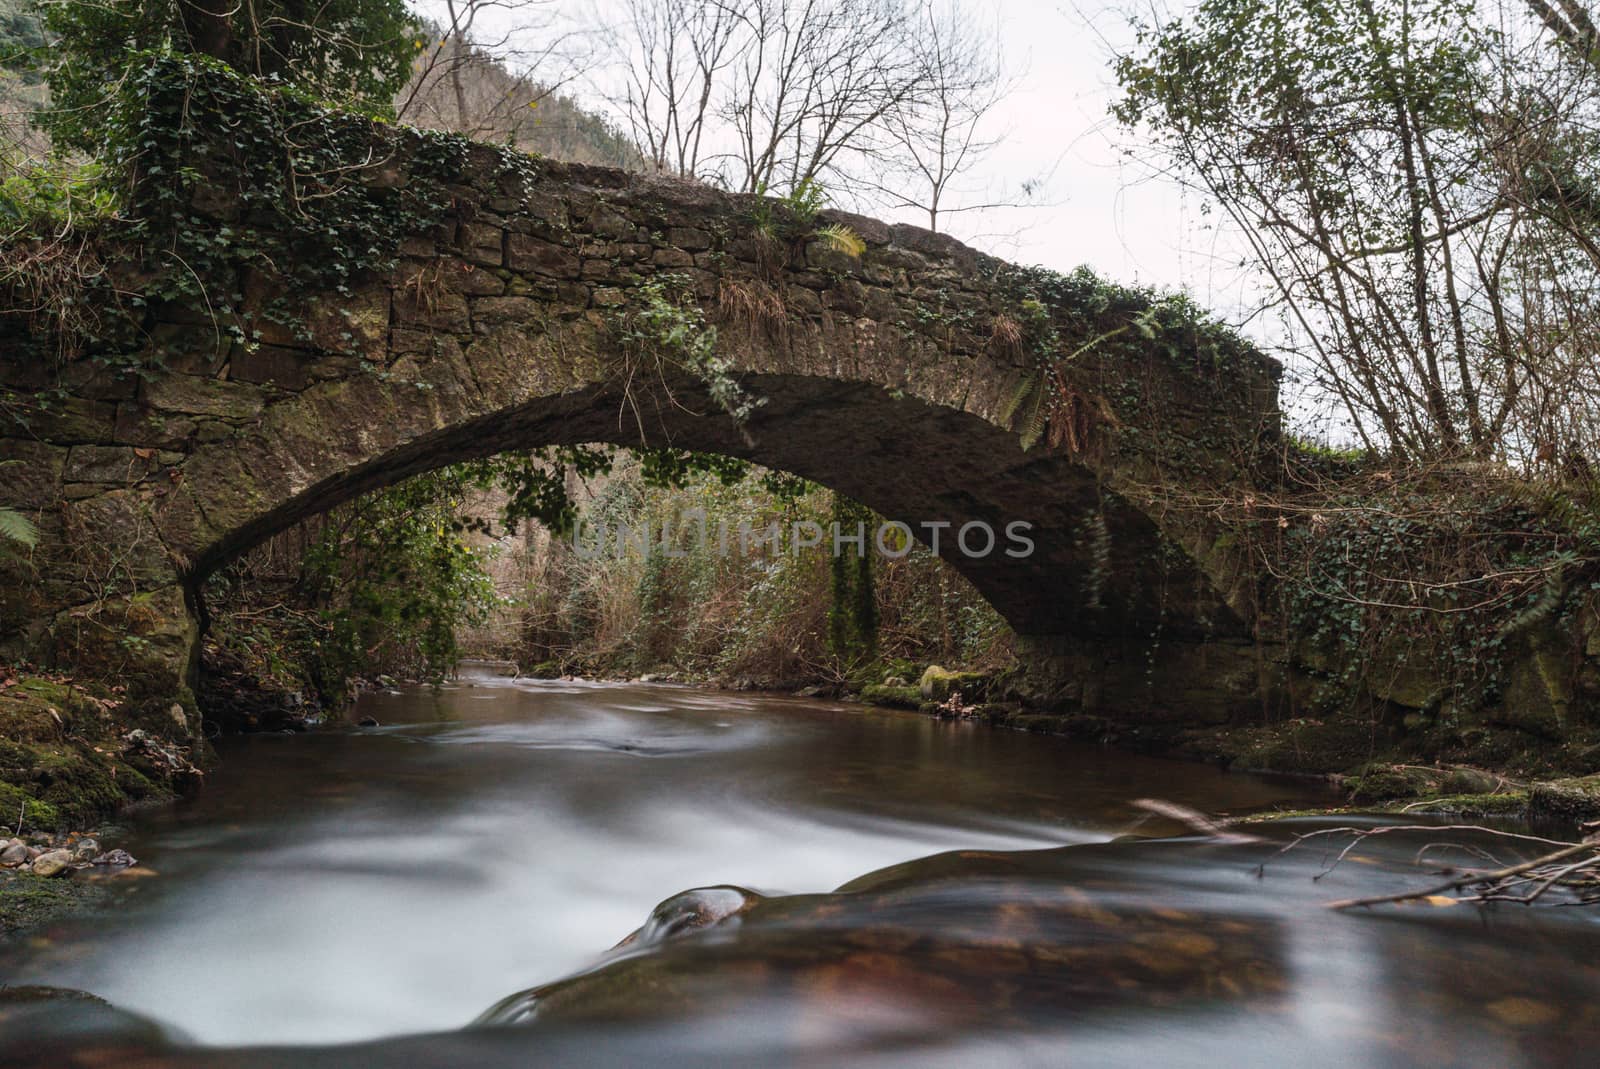 bridge with river underneath in a long exposure photo